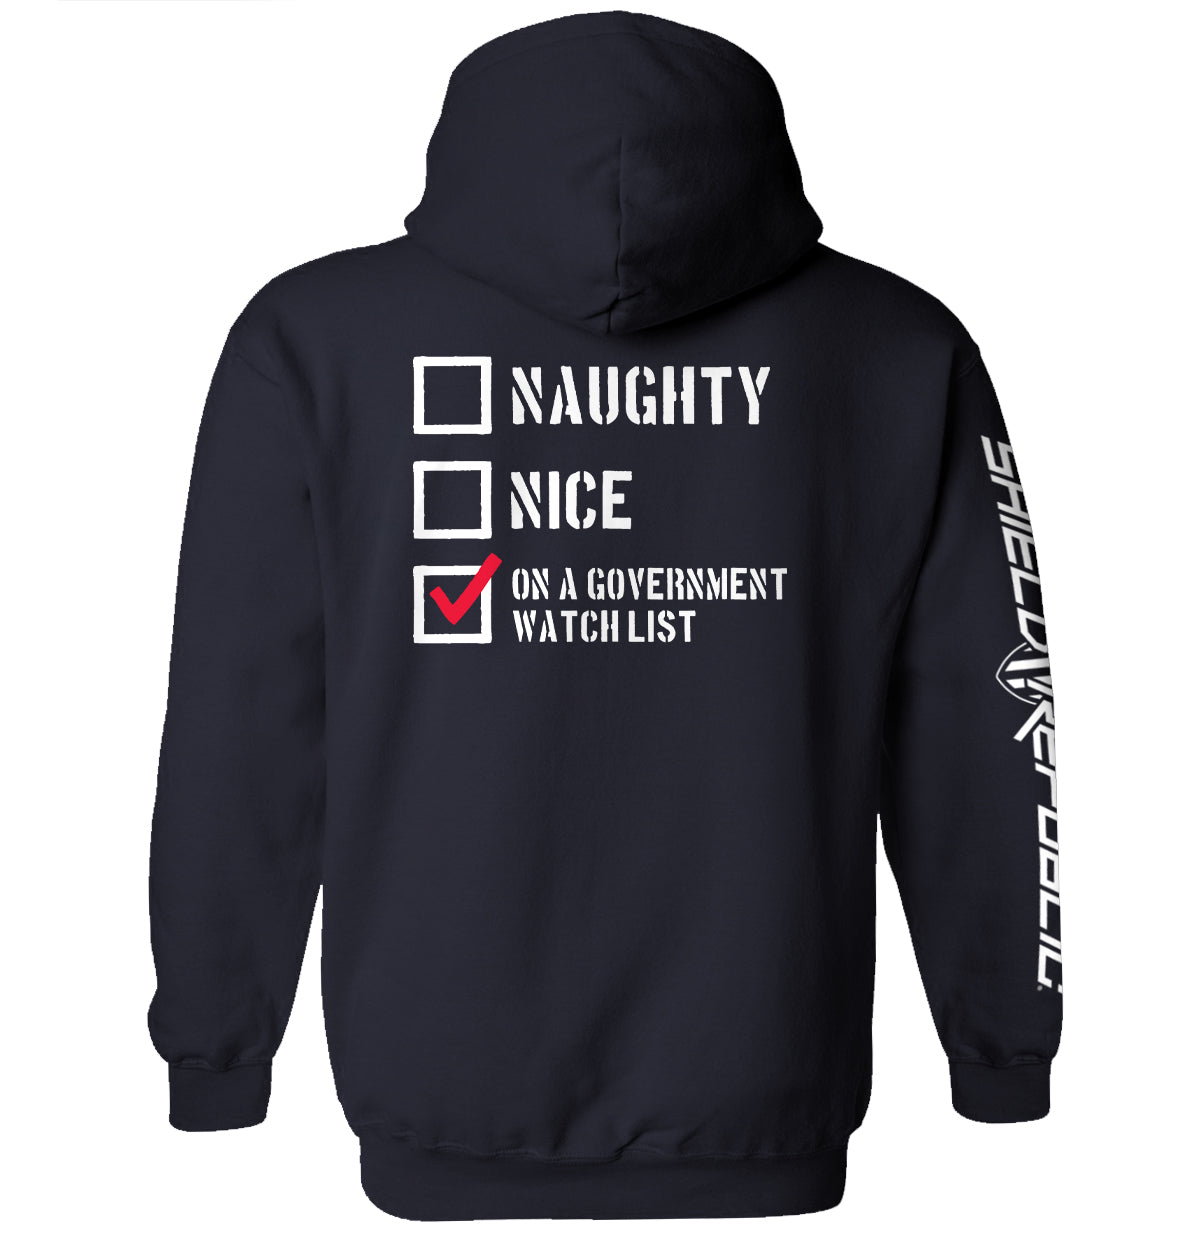 Naughty Nice On a Government Watch List